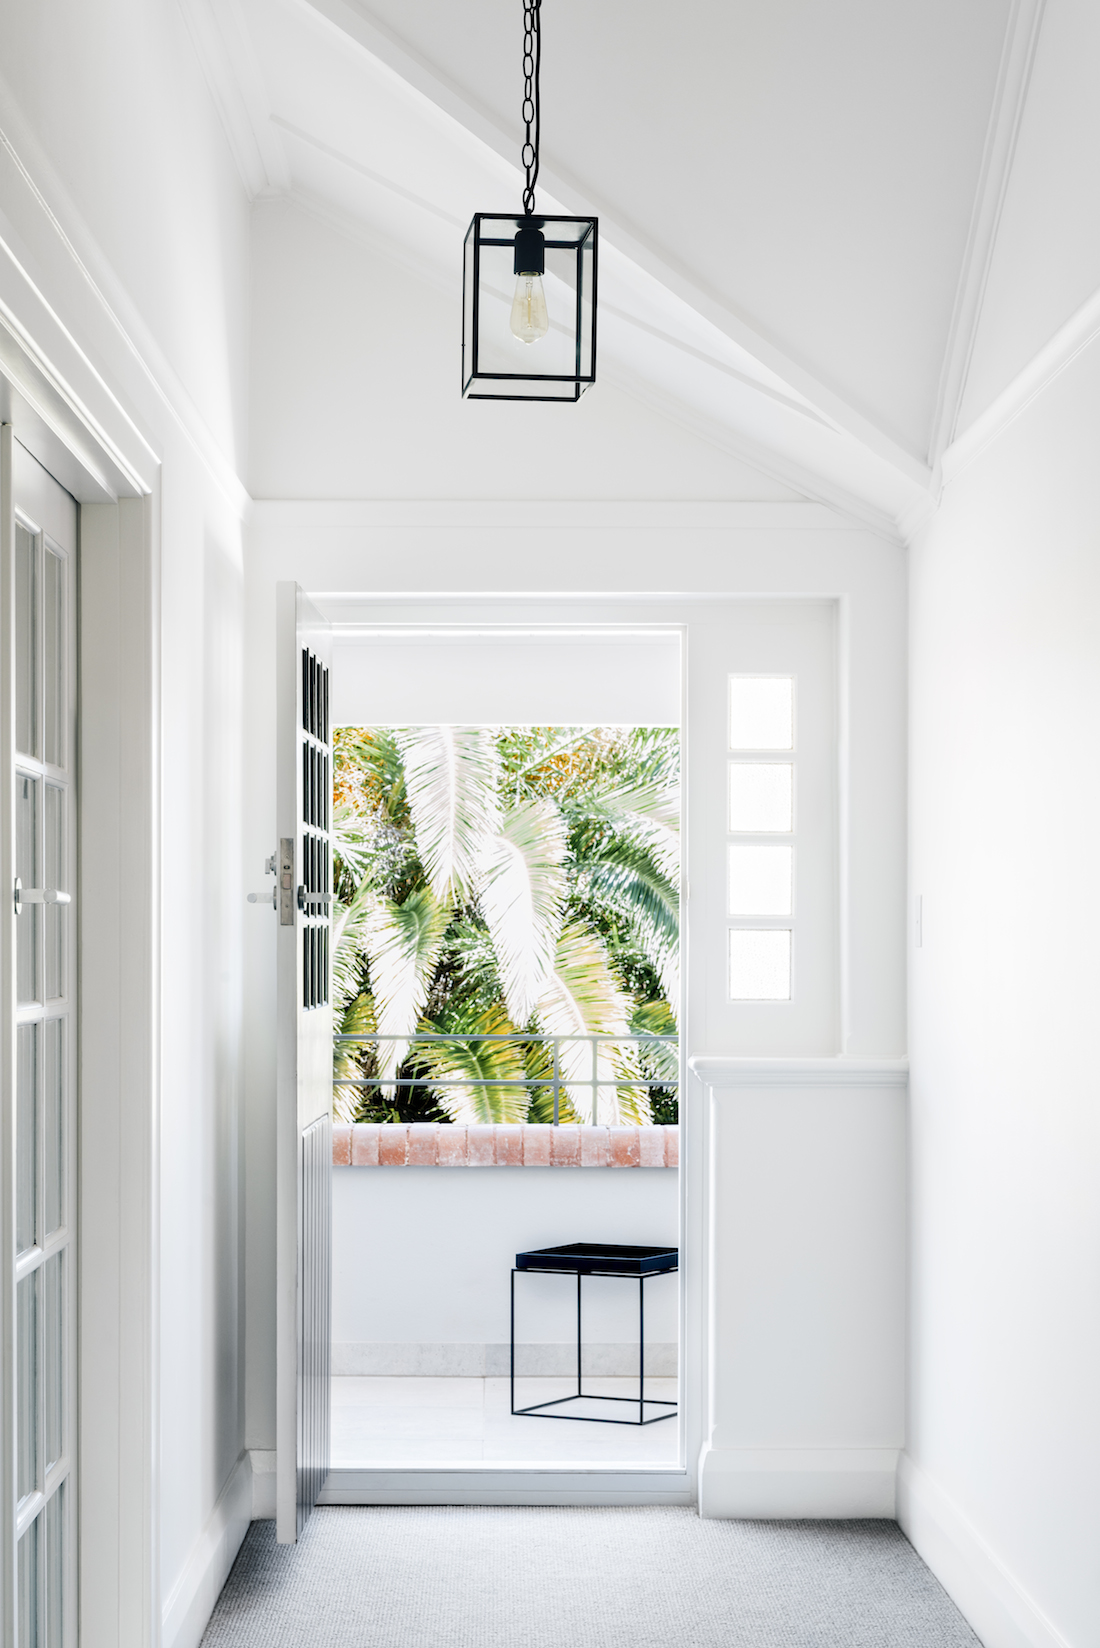 White and bright entrance to the home with black pendant light